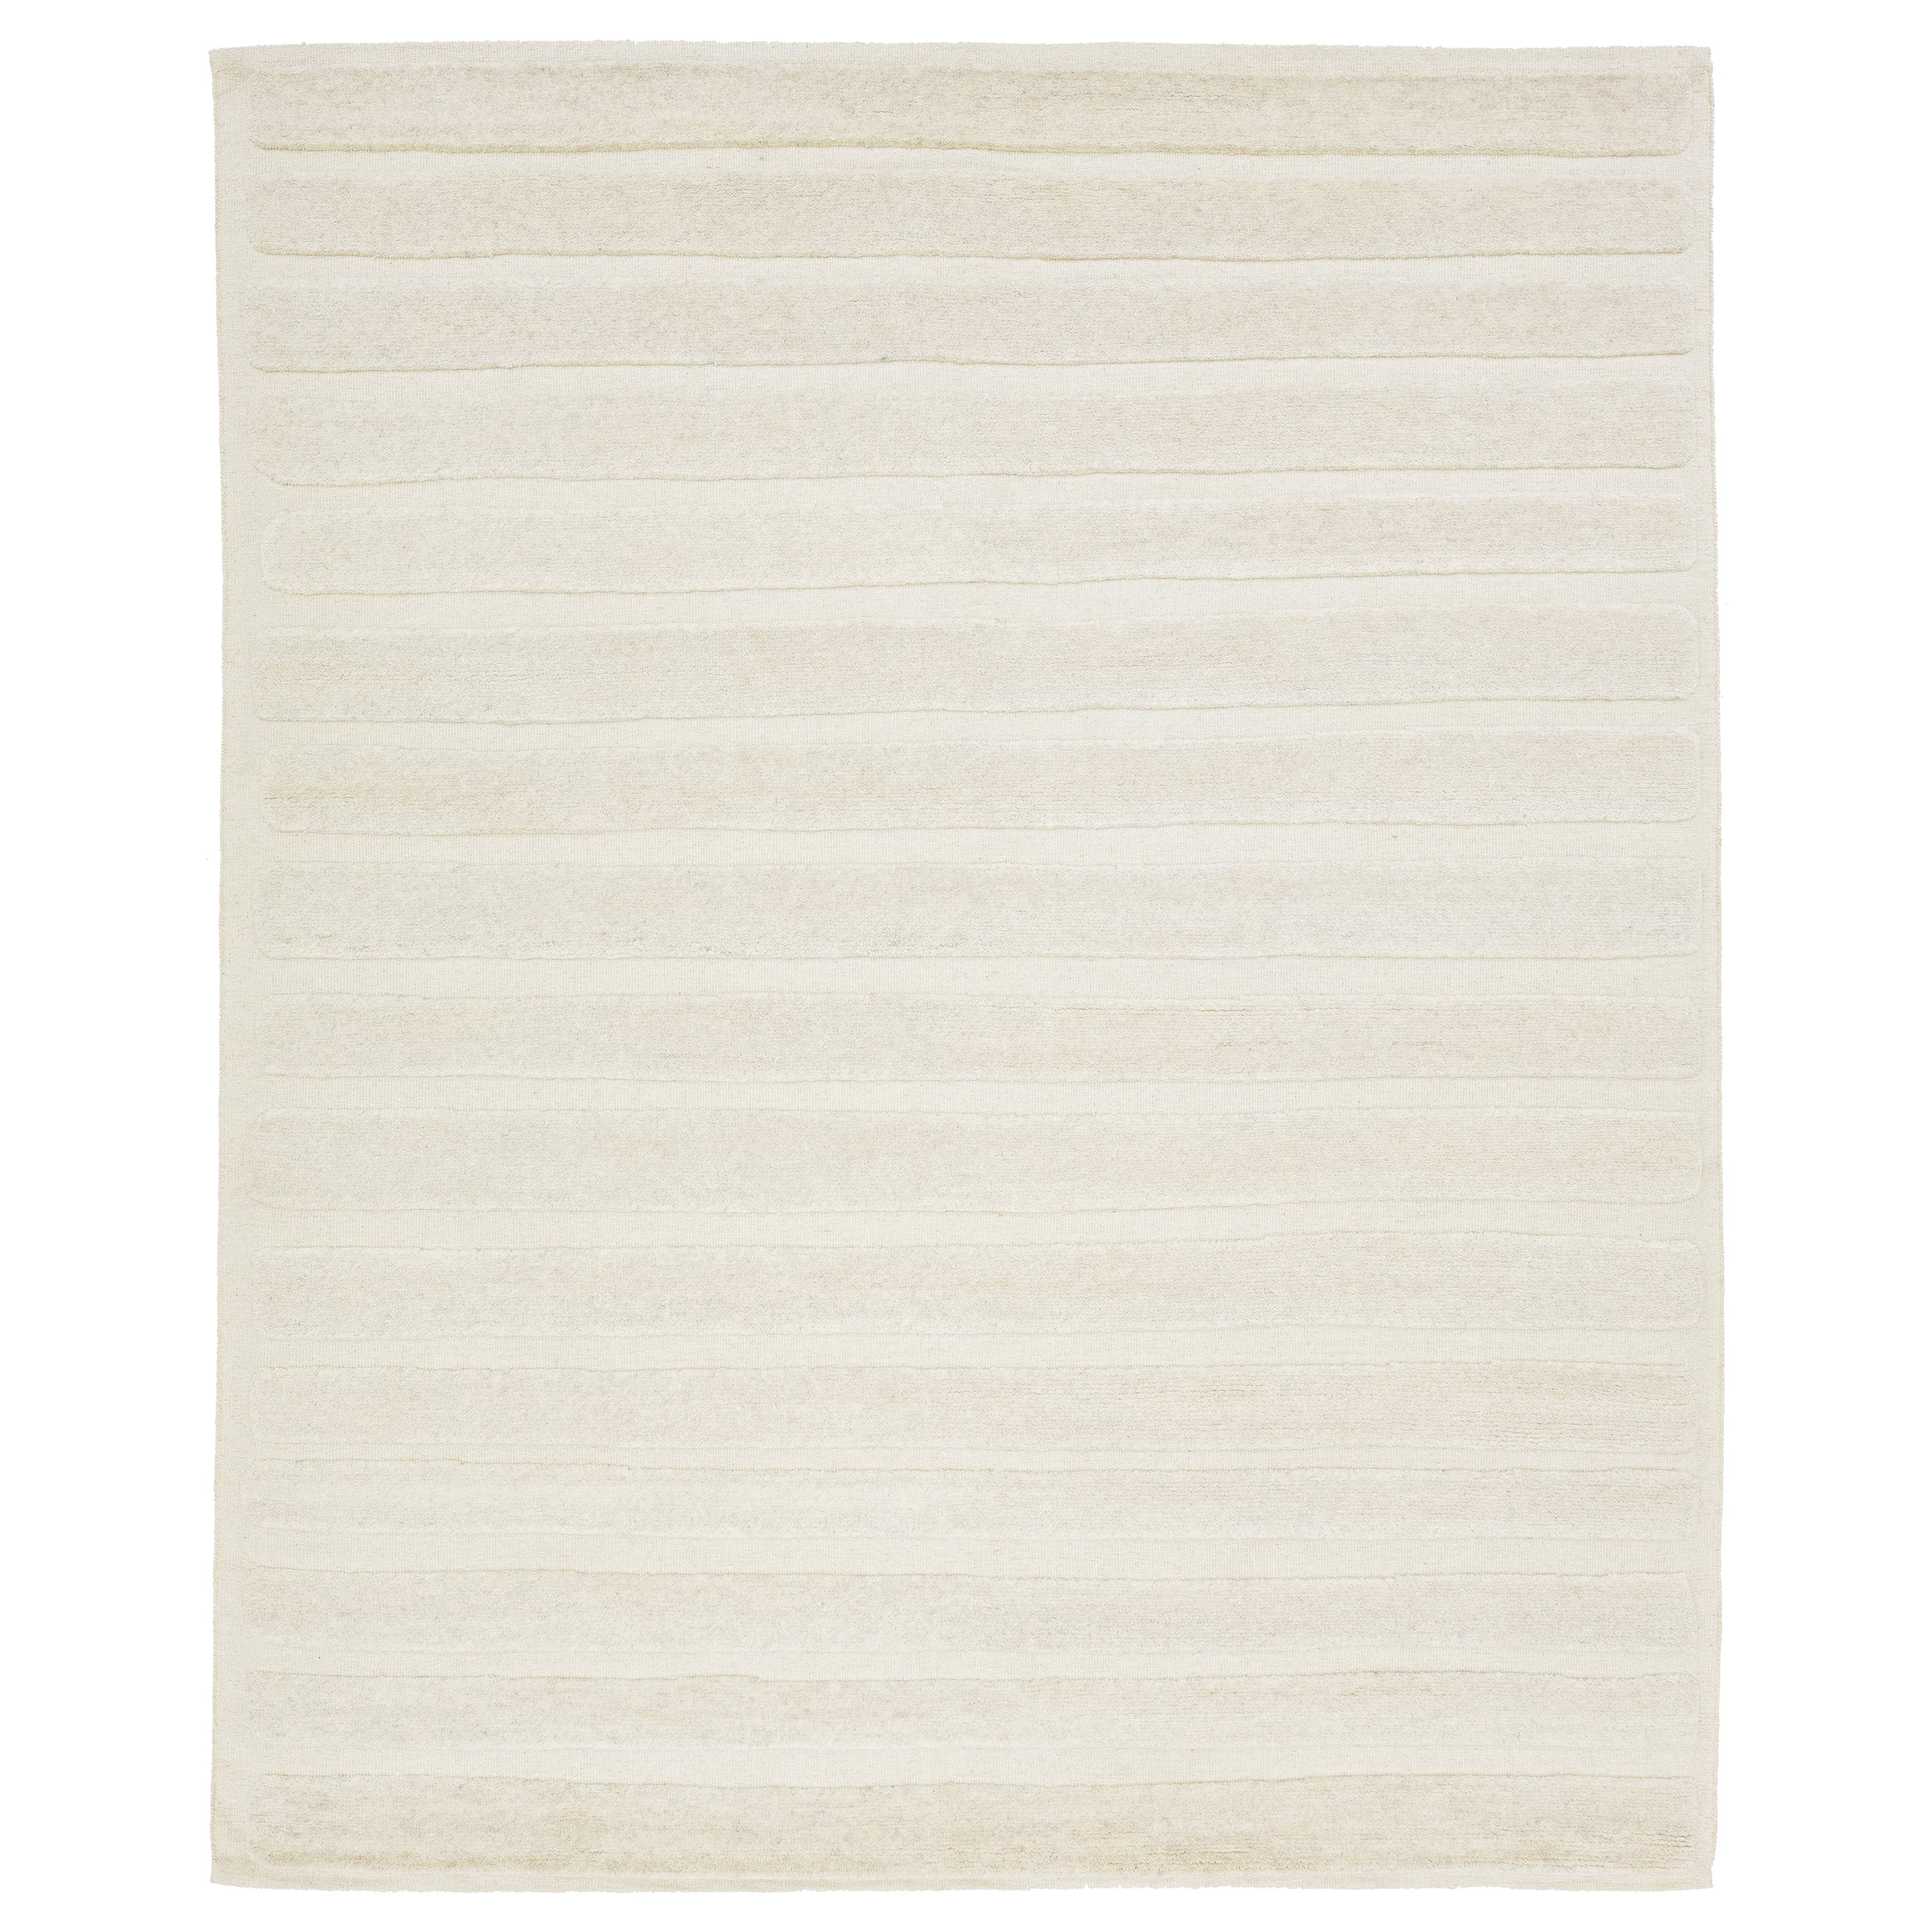 Apadana's Contemporary Ivory Wool Rug With a Striped Moroccan Style